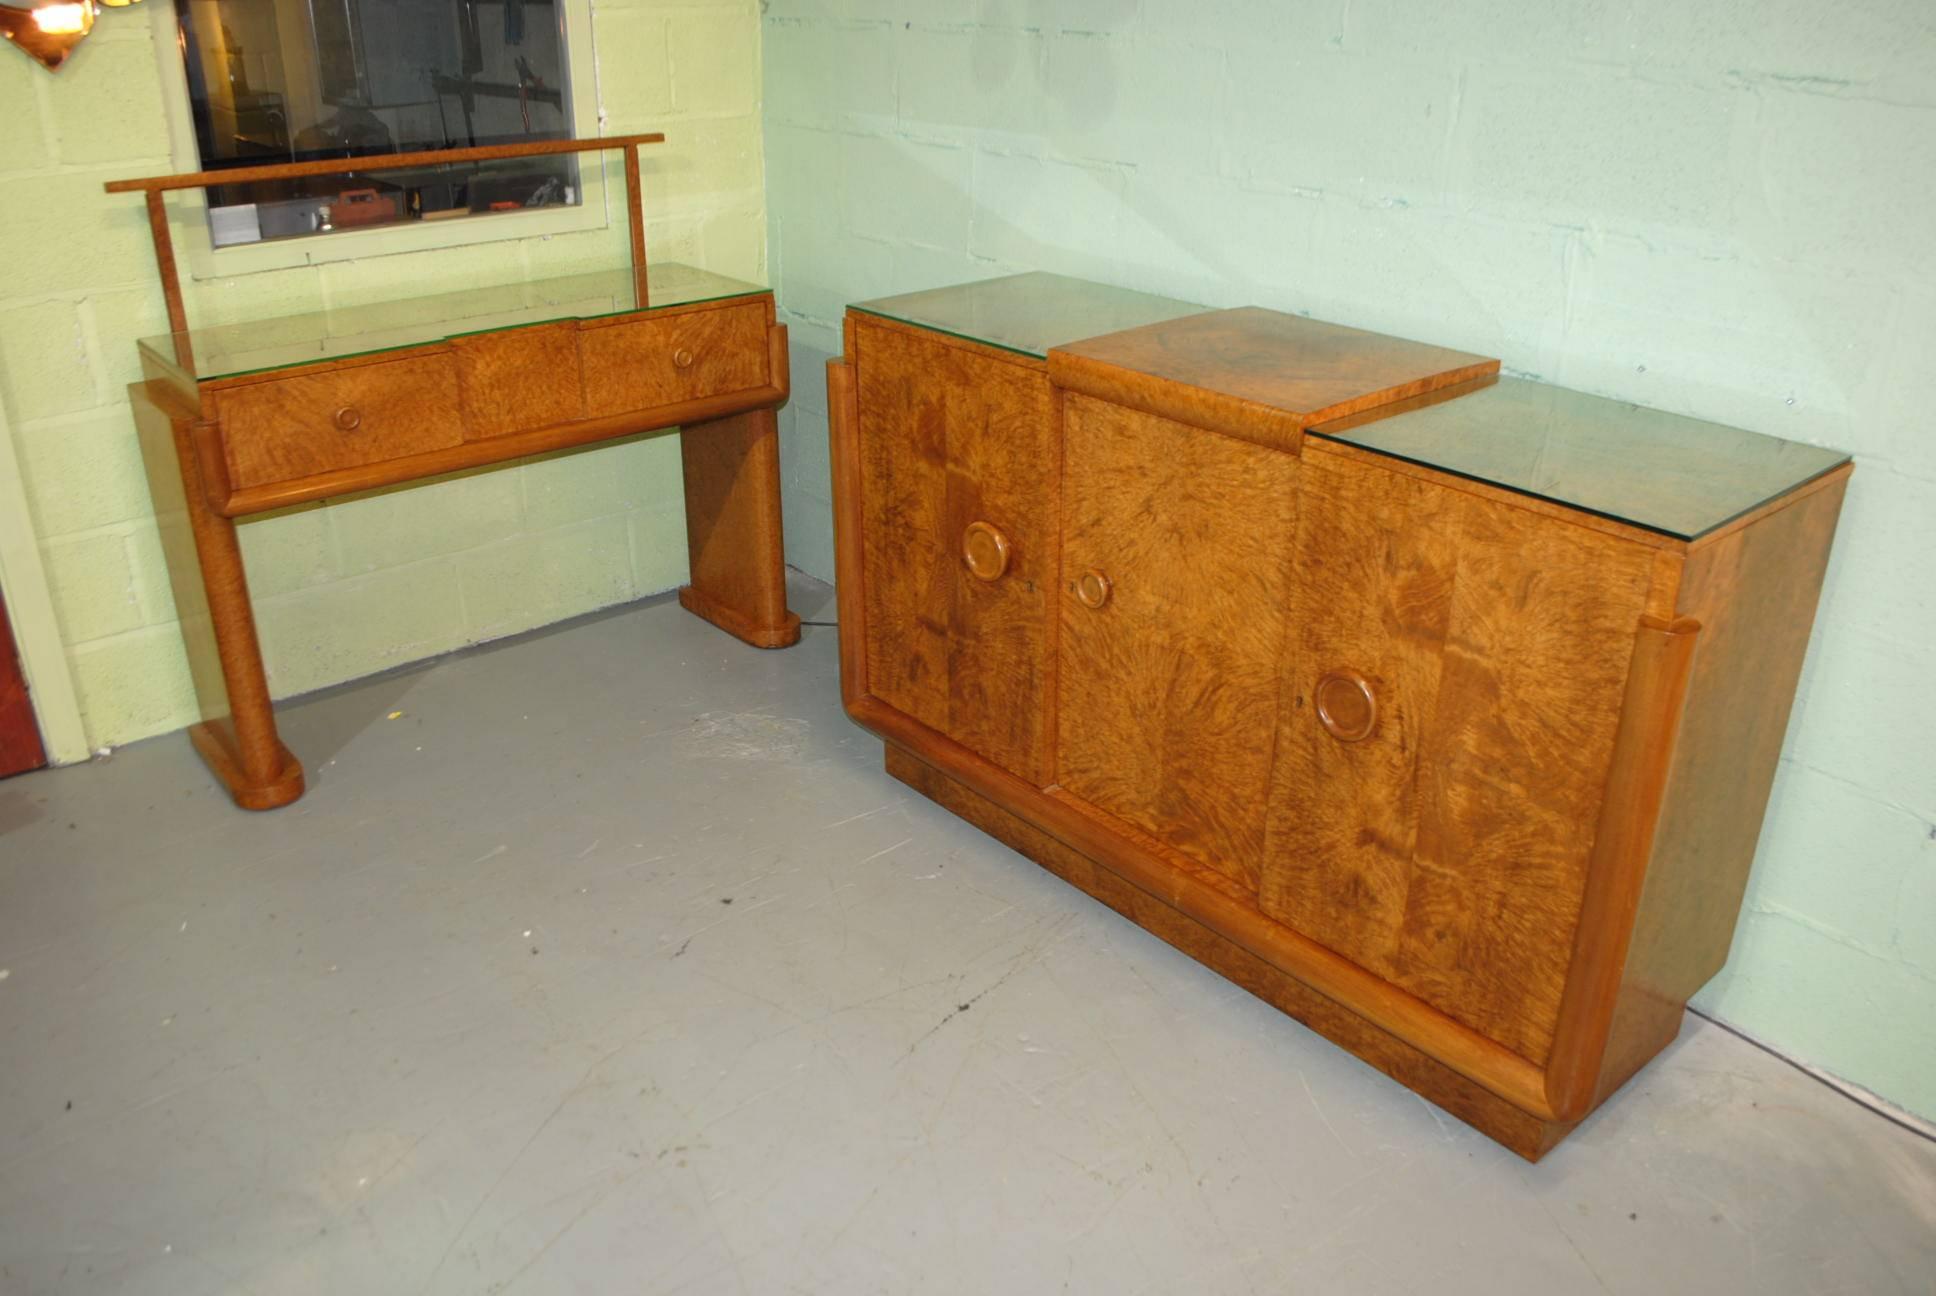 A truly stunning original Art Deco Hille dining room suite comprising of table, eight chairs (Two Carvers), sideboard with integral cocktail cabinet and a server.

I have to say to date this has to be the most fantastic and original full set of